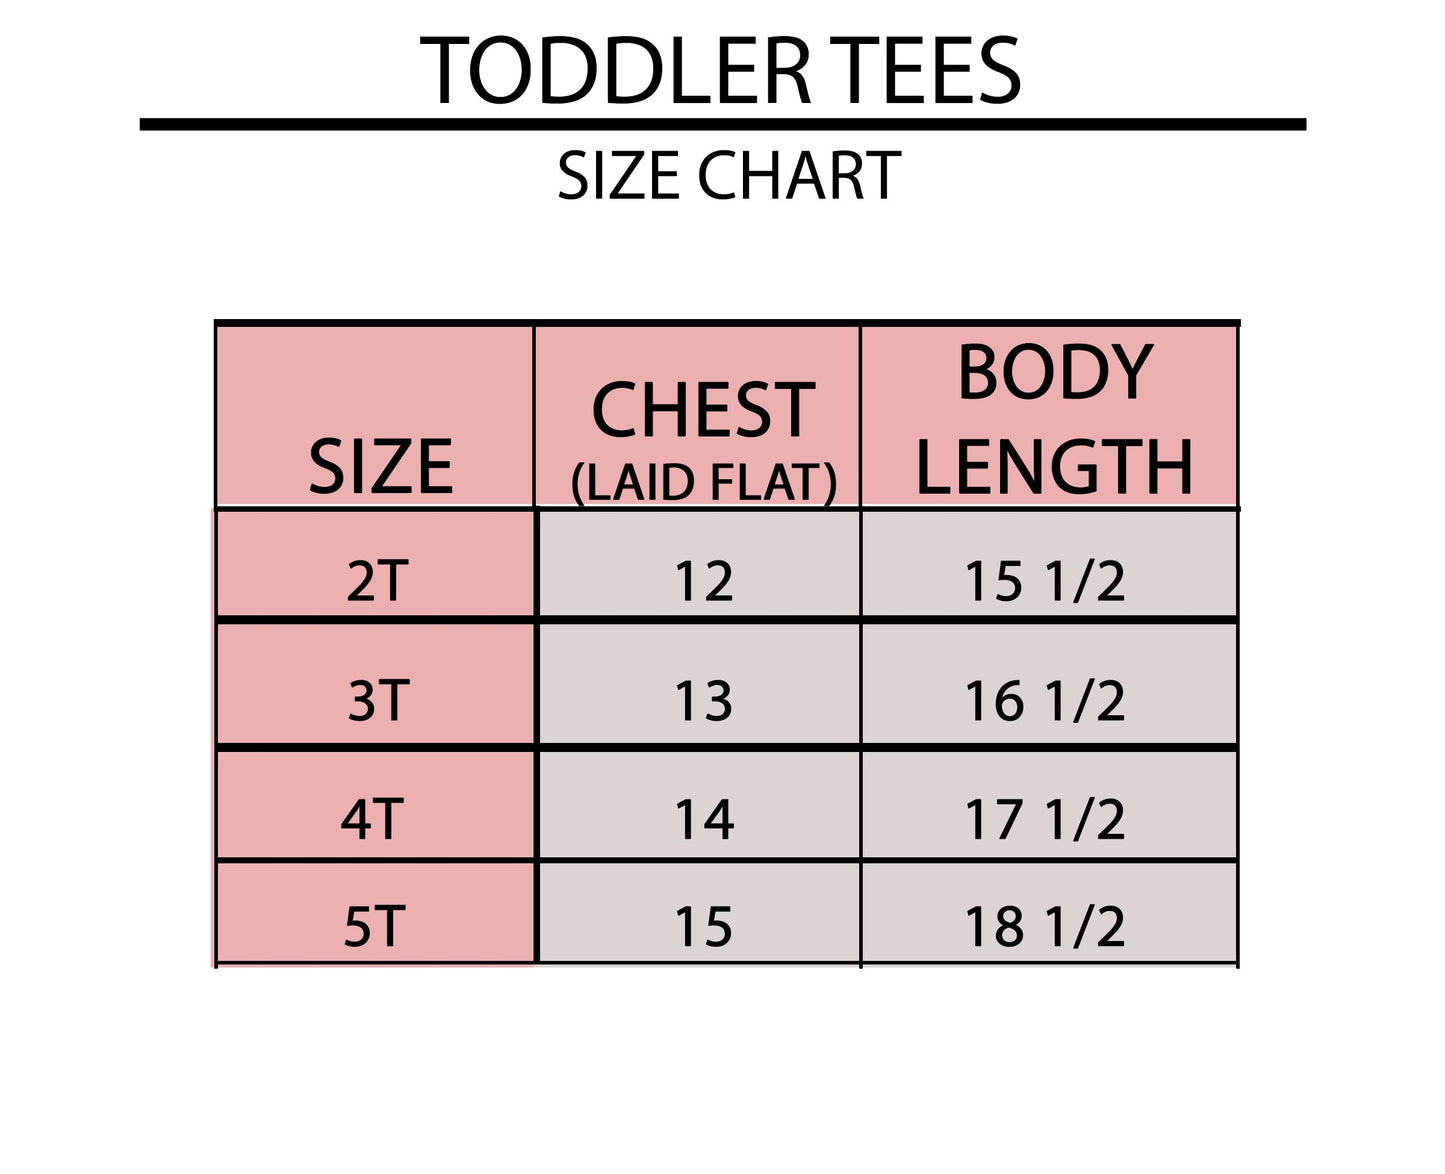 Choose Happy Smiley Face | Toddler Short Sleeve Crew Neck